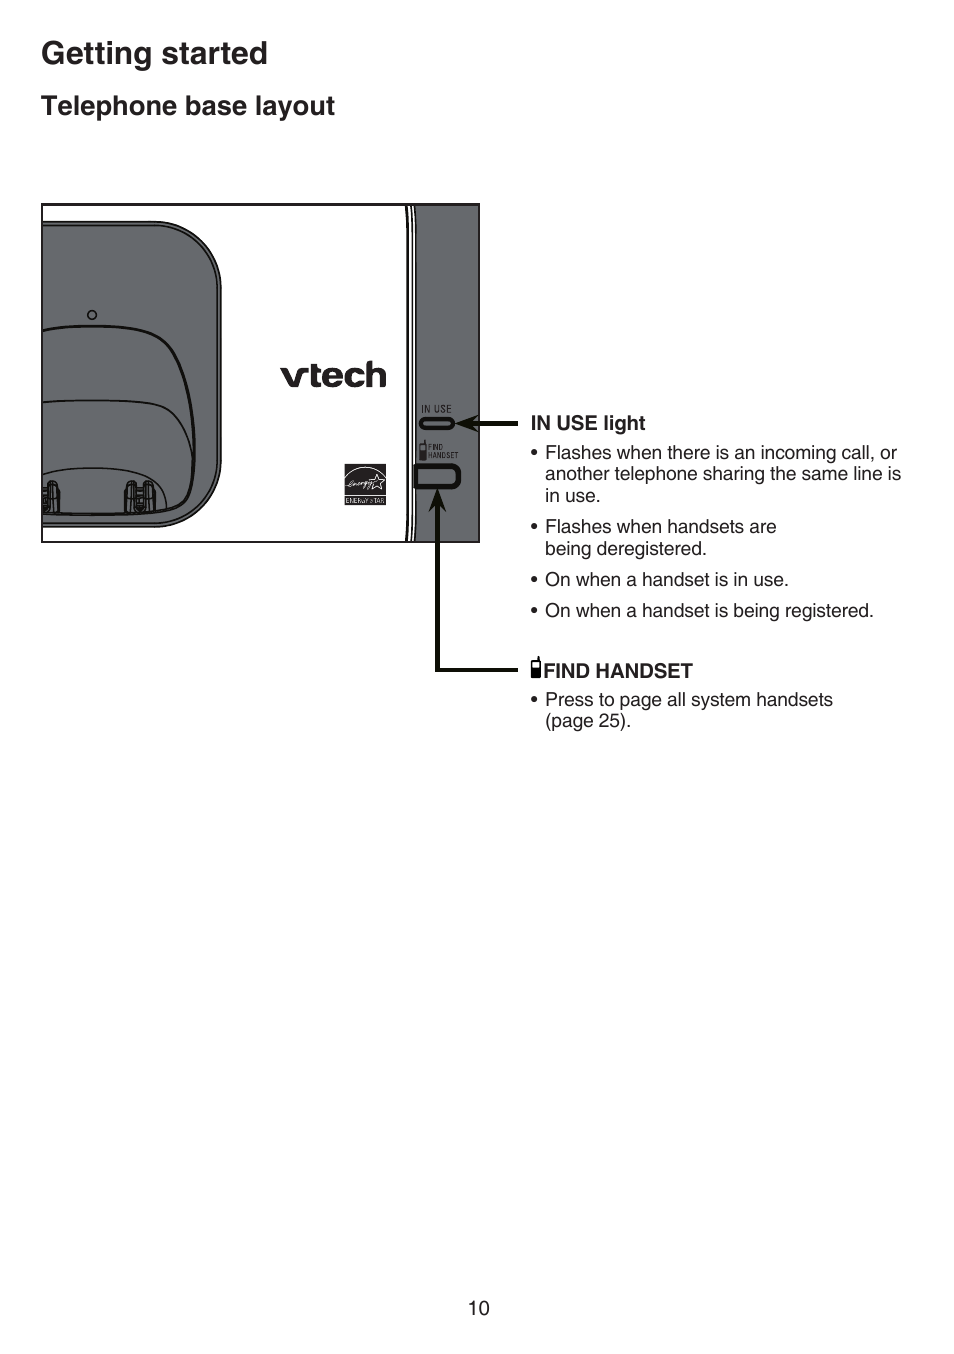 Telephone base layout, Getting started | VTech CS6719-2 Manual User